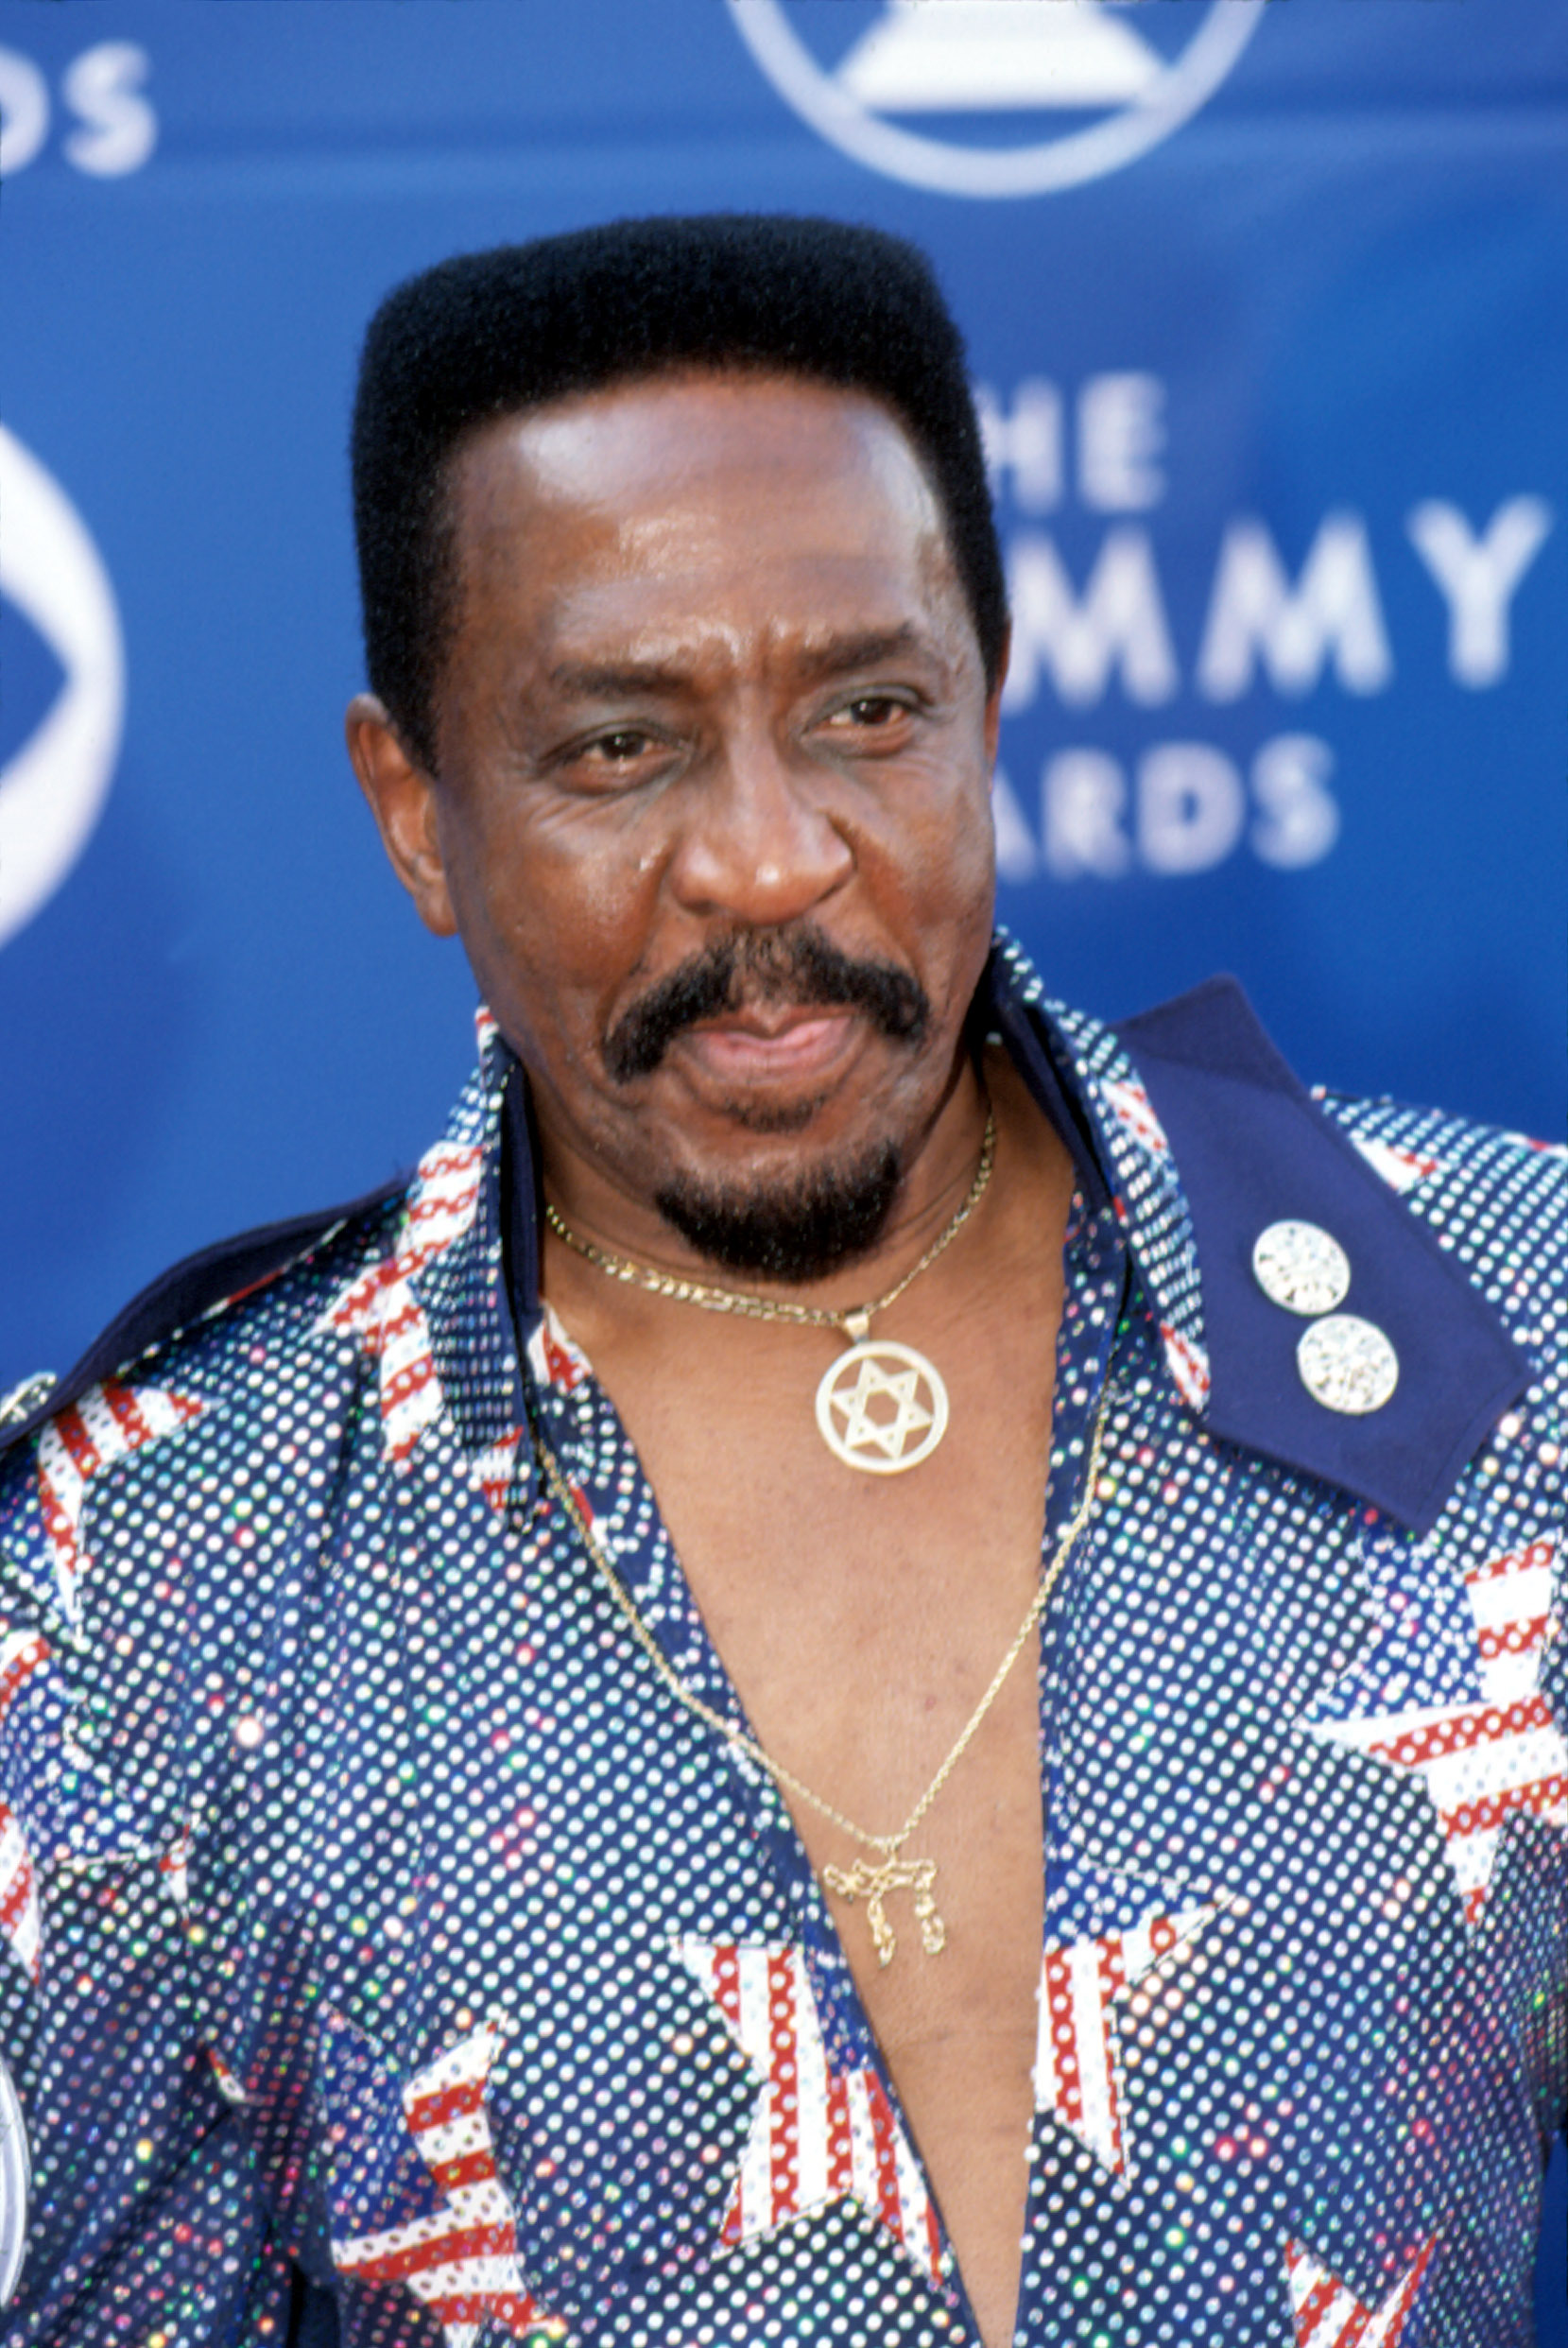 A photo of Ike Turner in blue and white polka dot design T-shirt at an event.